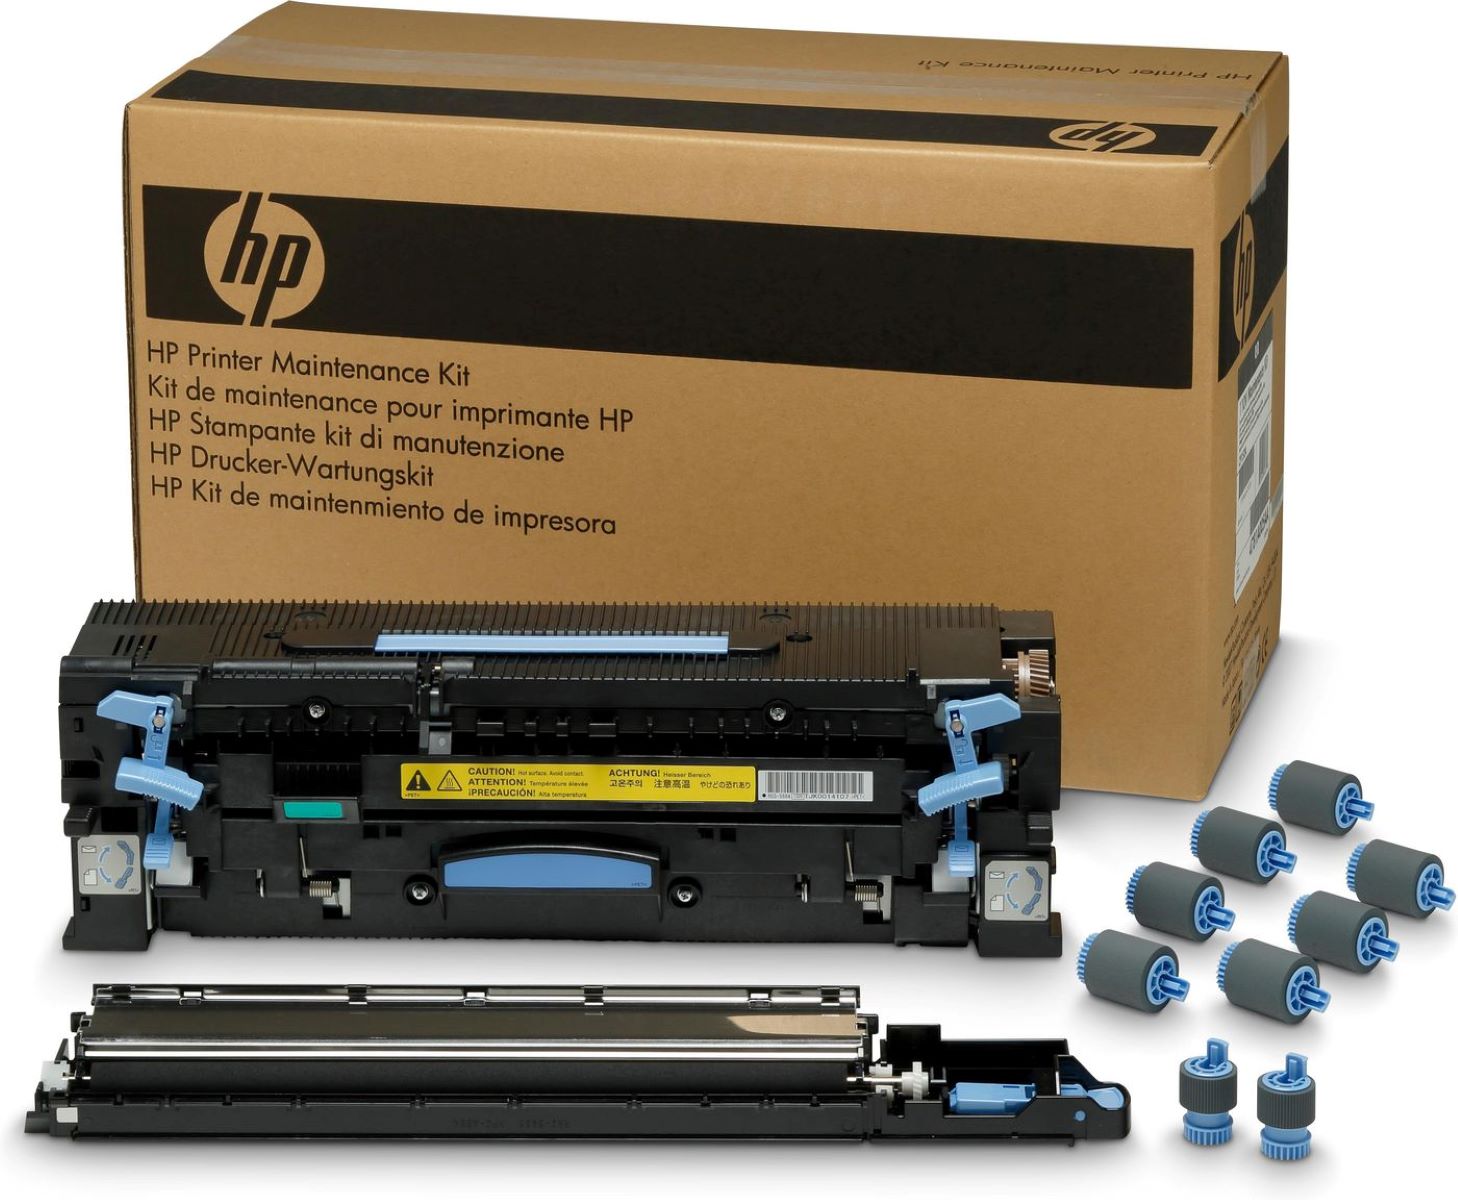 What Is A Maintenance Kit For A Printer